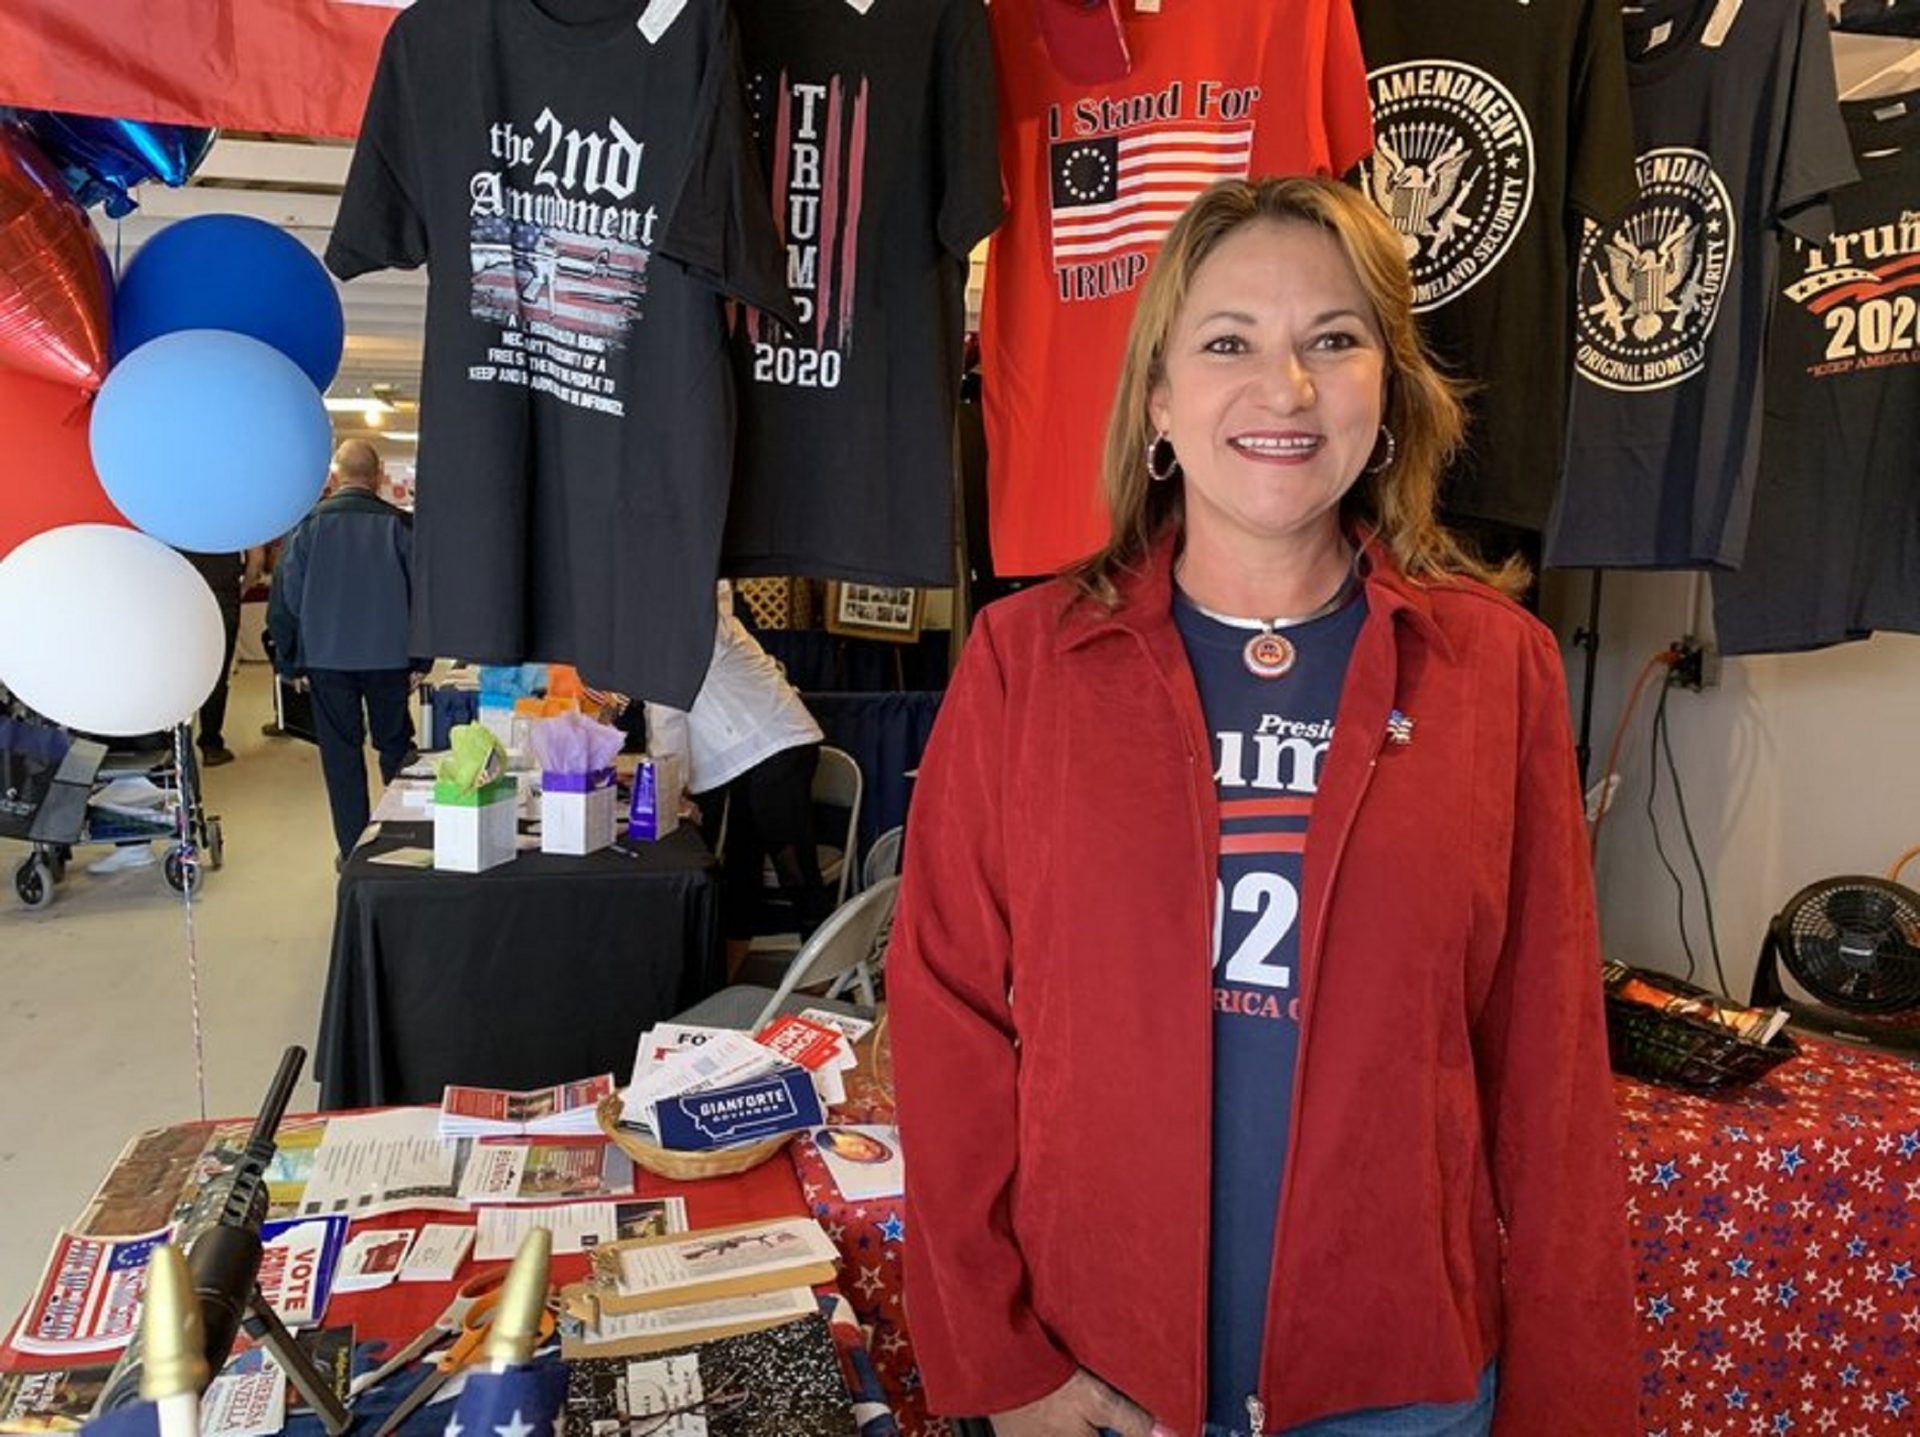 Montana State Rep. Theresa Manzella says President Trump's message of "America first" resonates in conservative Ravalli County, south of Missoula.